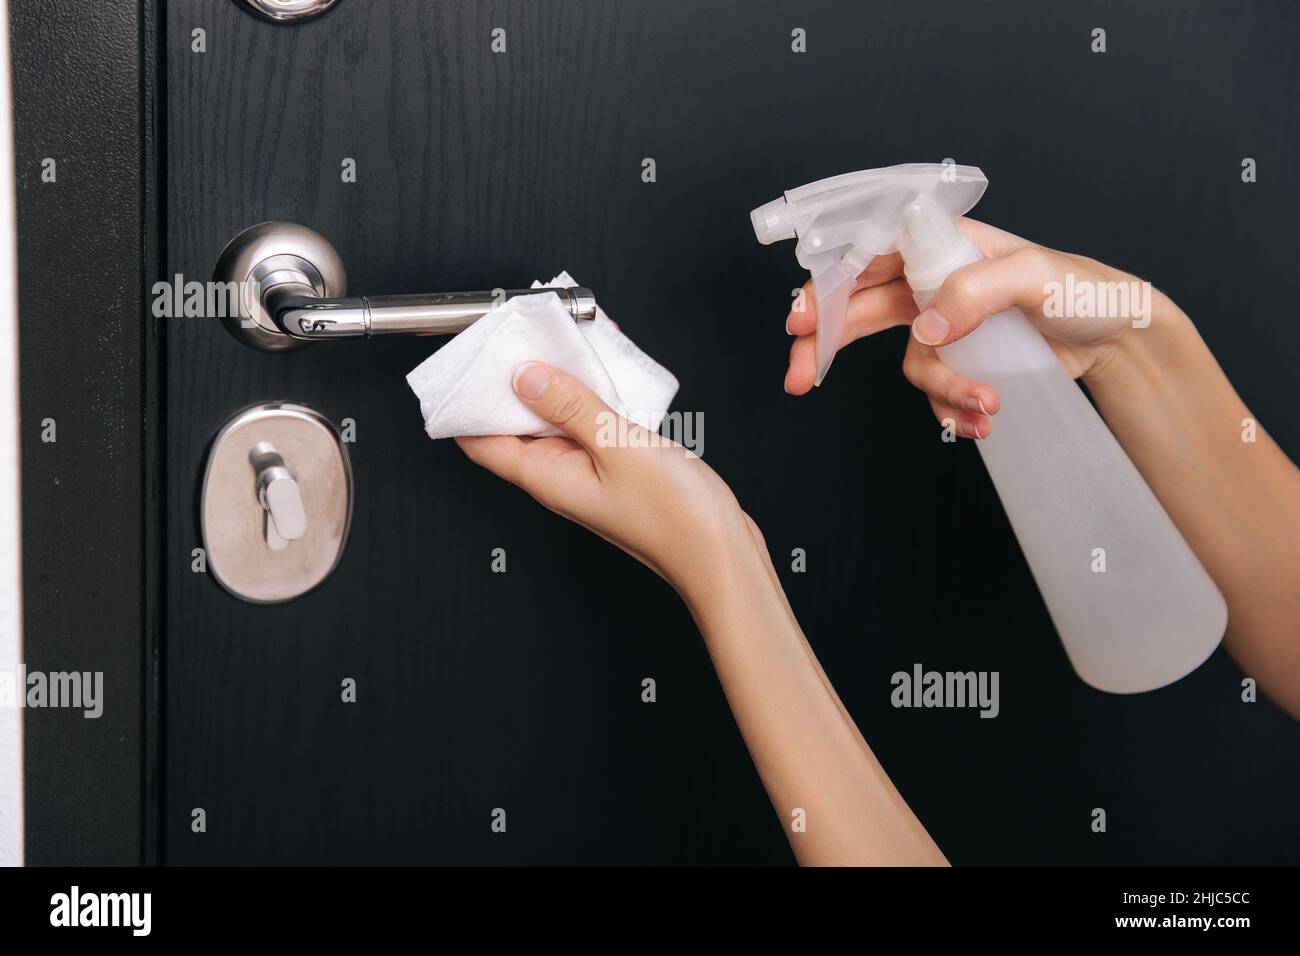 Cleaning black door handles with an antiseptic wet wipe and sanitizer spray. Disinfection in hospital and public spaces against corona virus. Woman Stock Photo